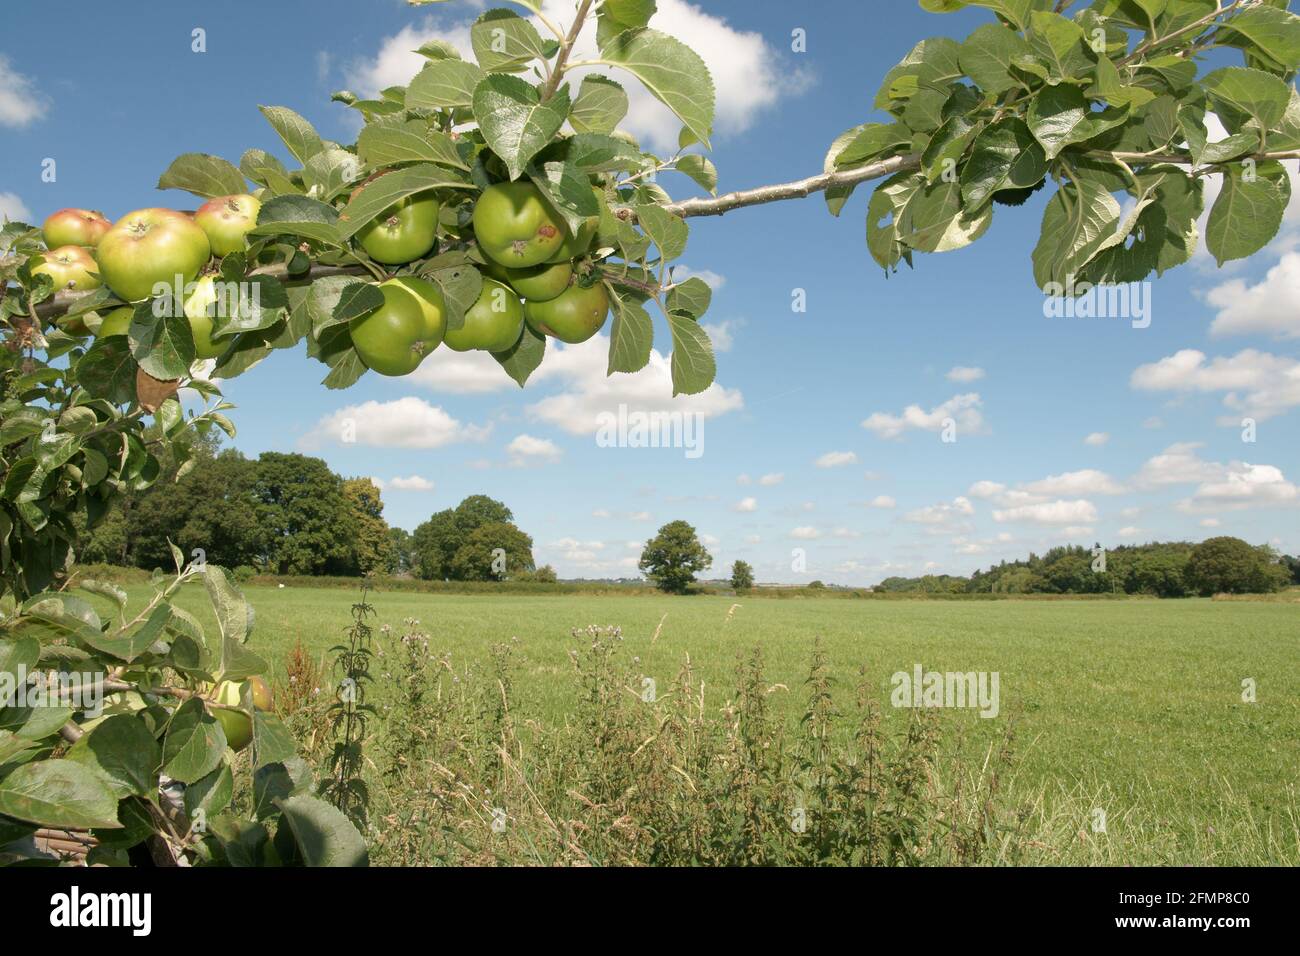 Bramley cooking apples or Malus domestica 'Bramley's Seedling' a popular British variety growing in an orchard in an English farming landscape Stock Photo